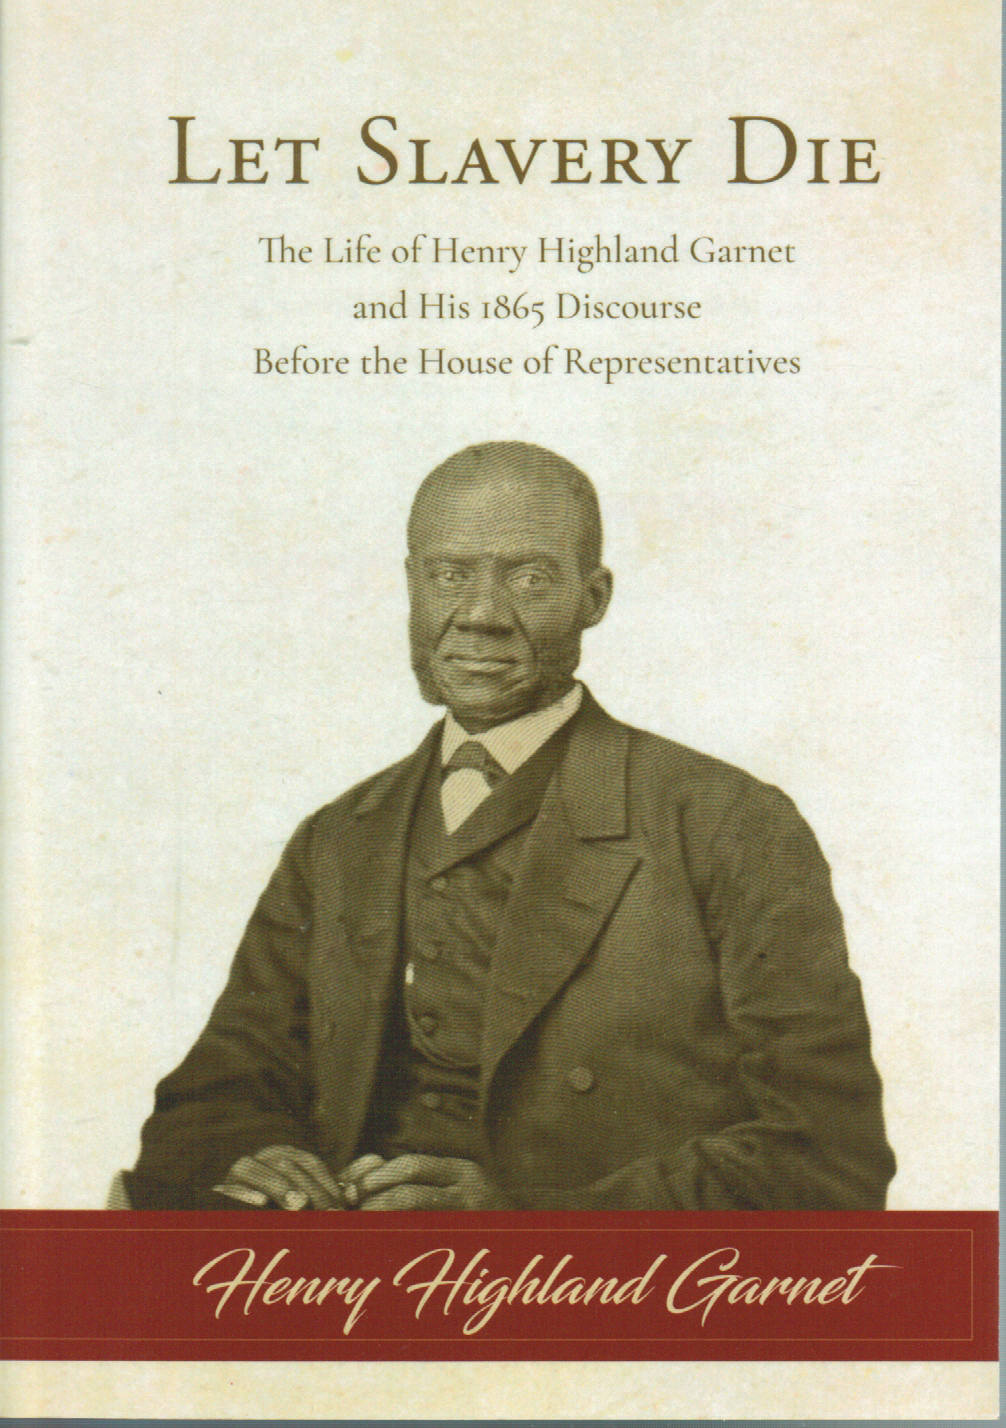 Let Slavery Die: The Life of Henry Highland Garnet and His 1865 Discourse Before the House of Representatives